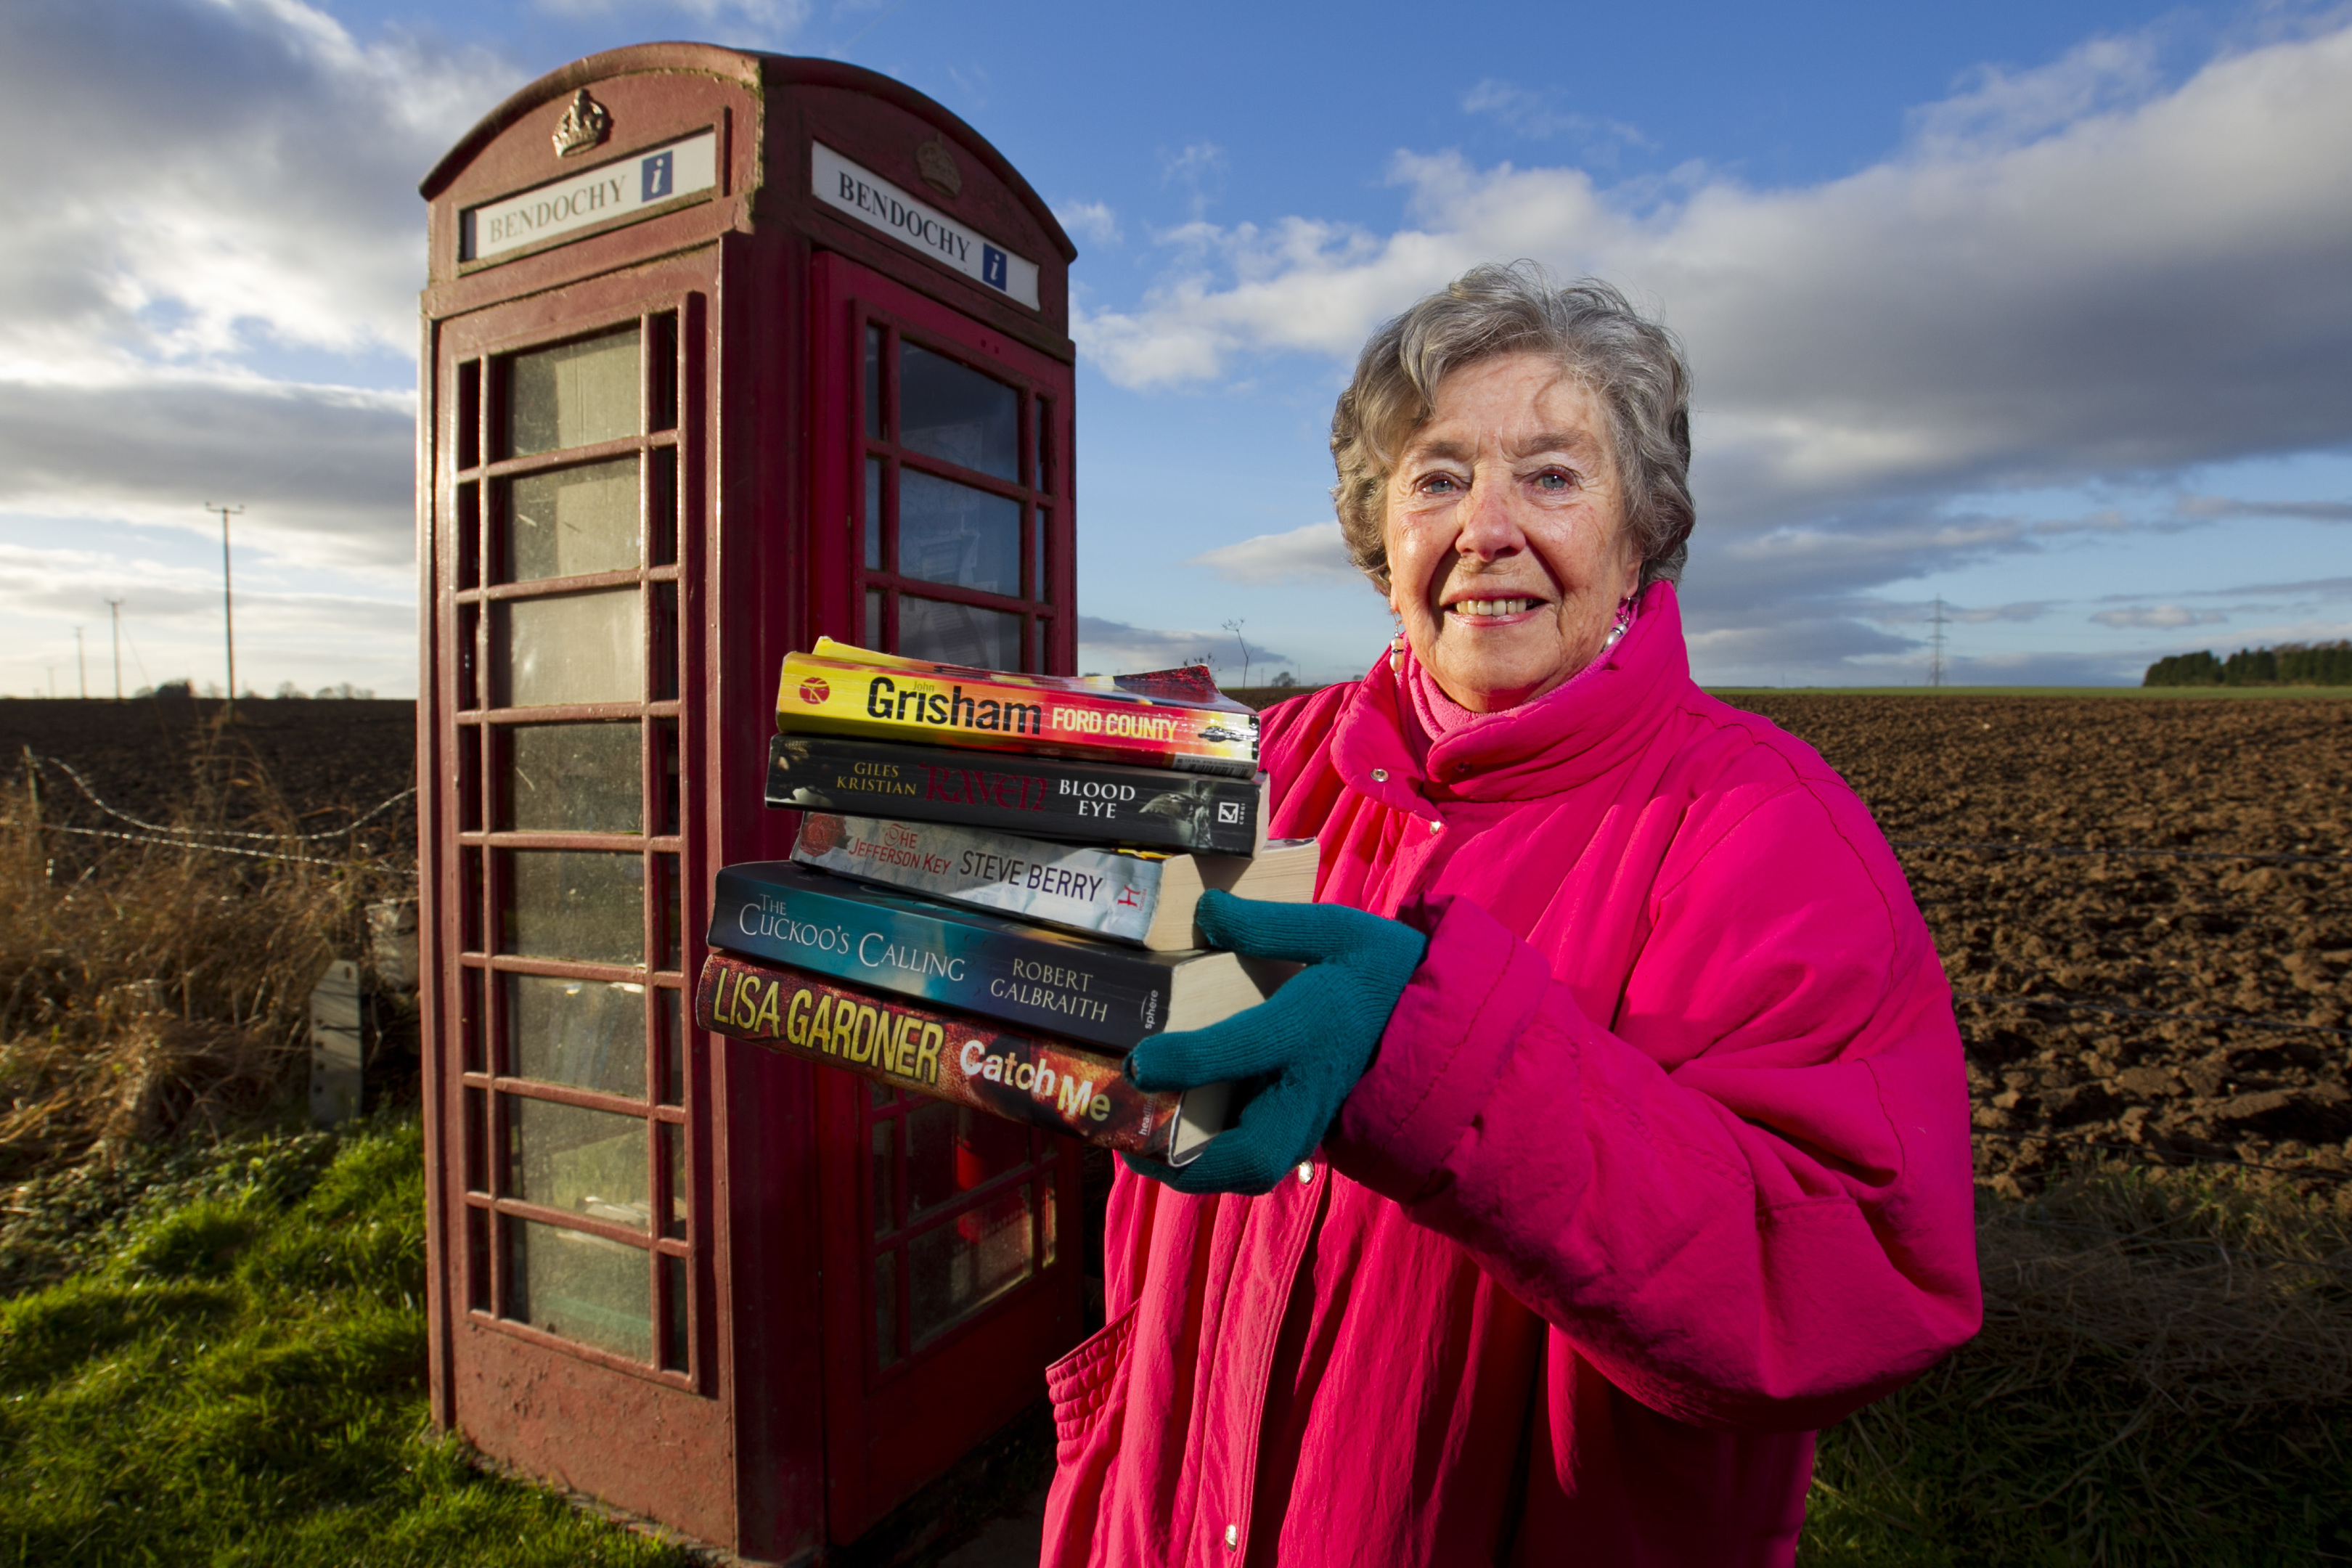 Pics of a telephone box in Bendochy which has been turned into a library (Andrew Cawley / DC Thomson)